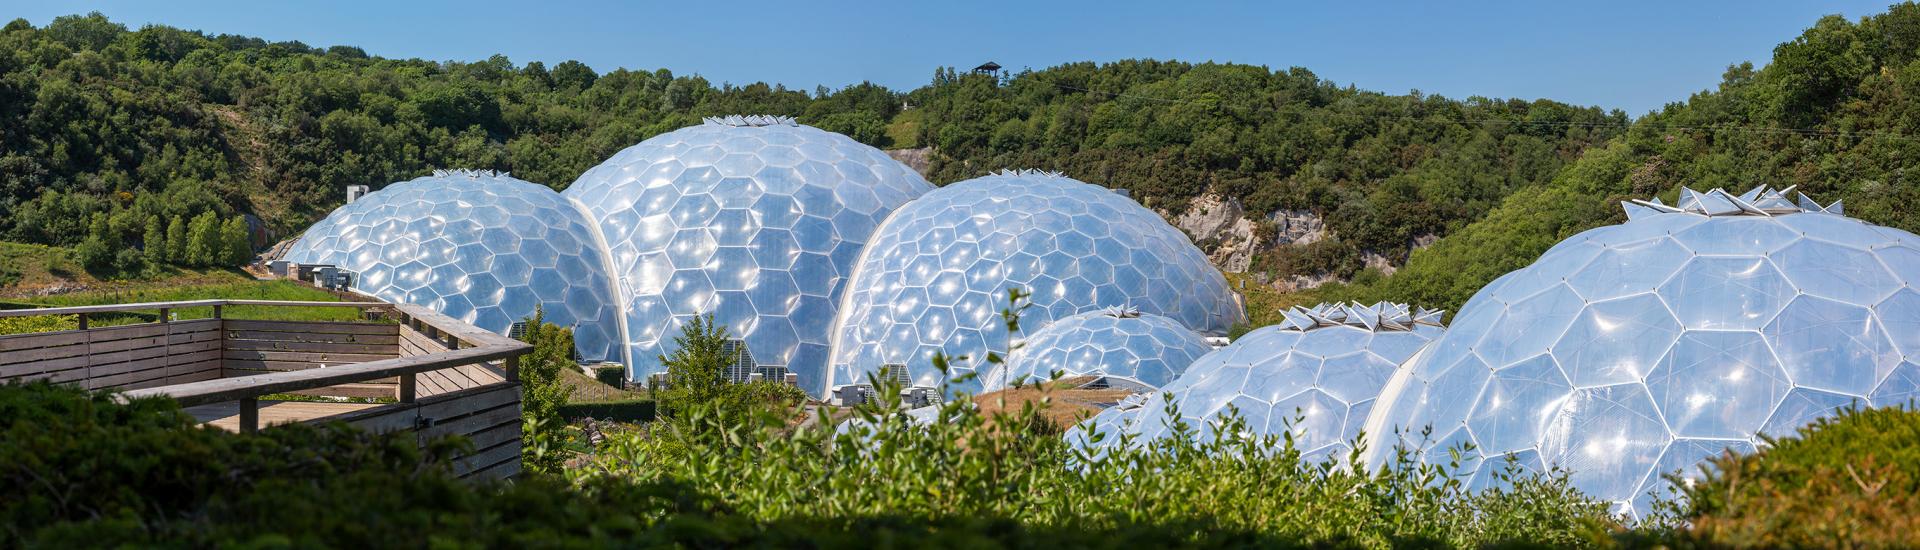 Eden Project Biomes panorama